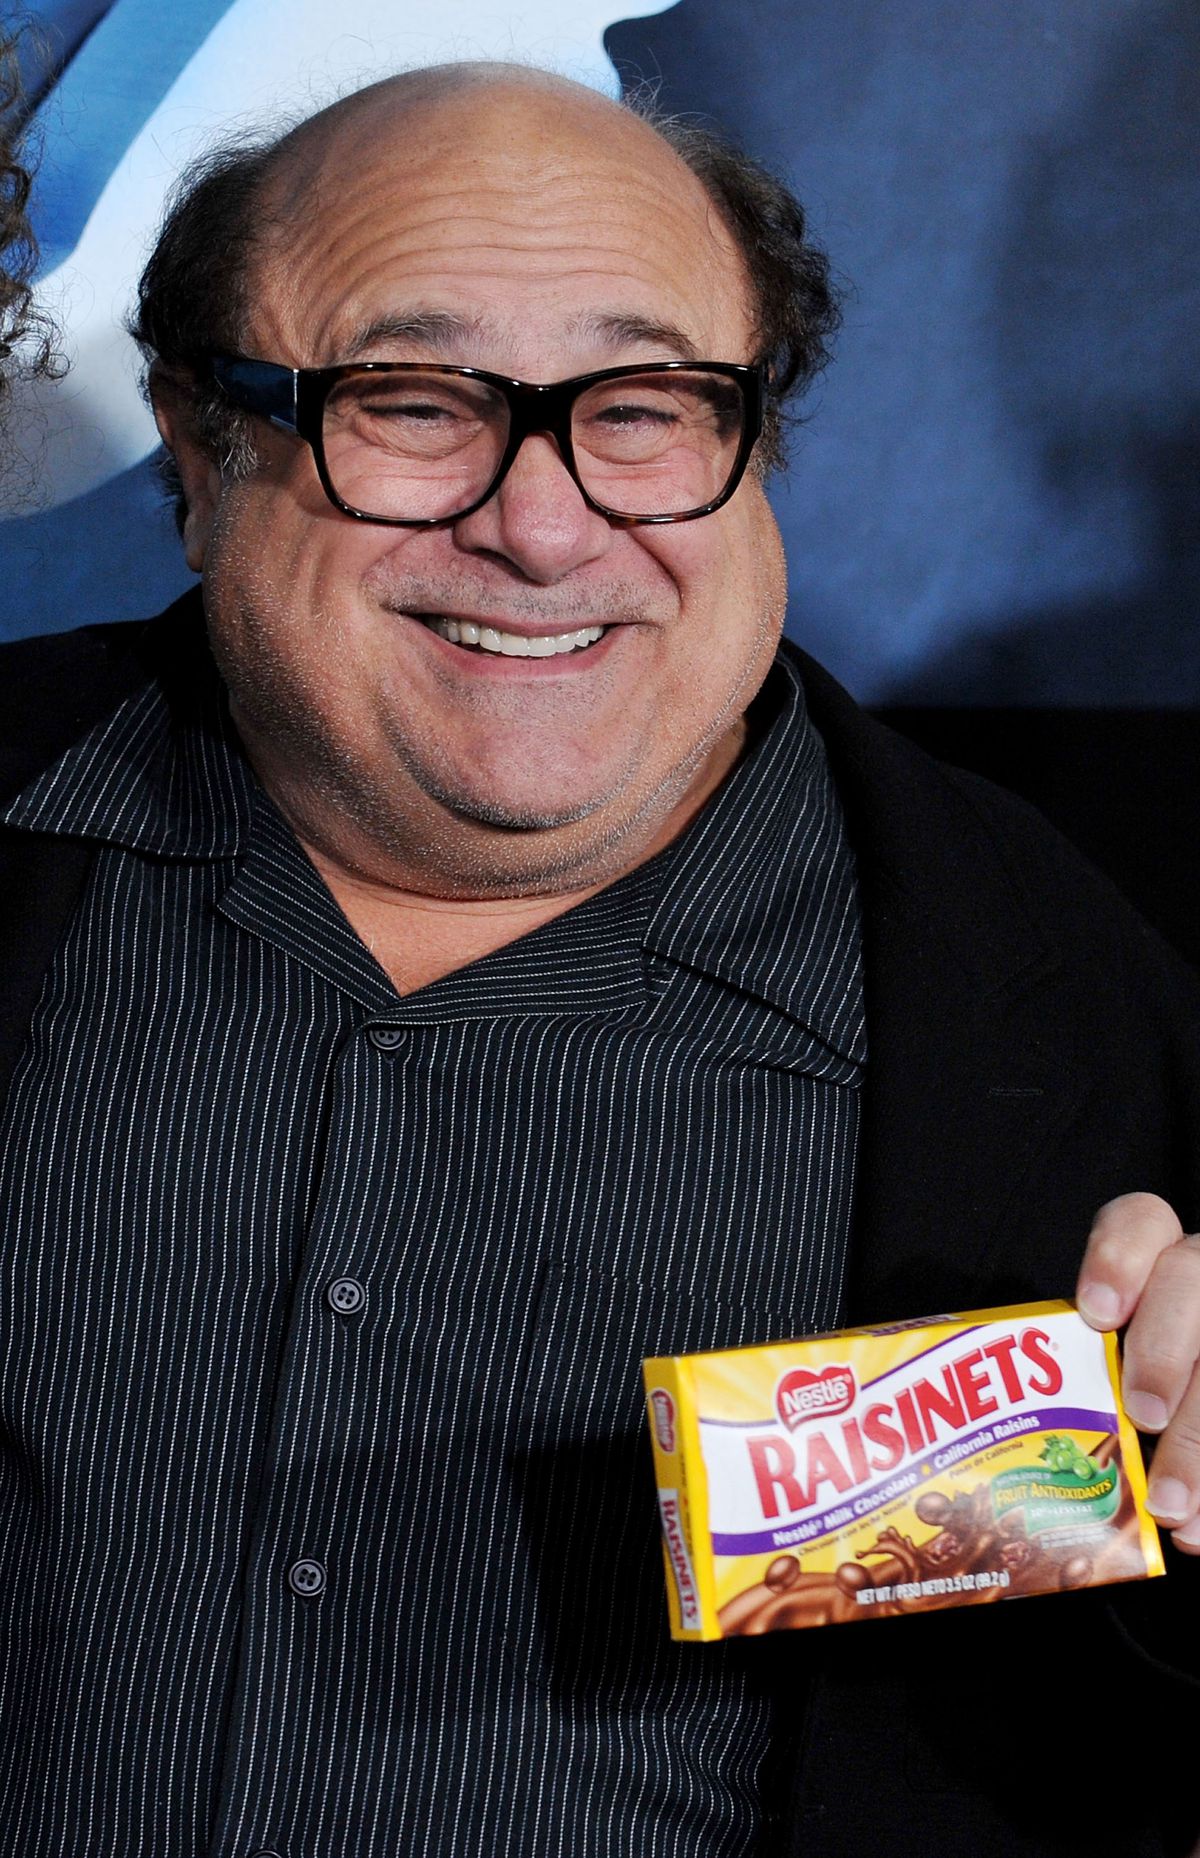 Danny DeVito holds up a box of Raisinets and smiles